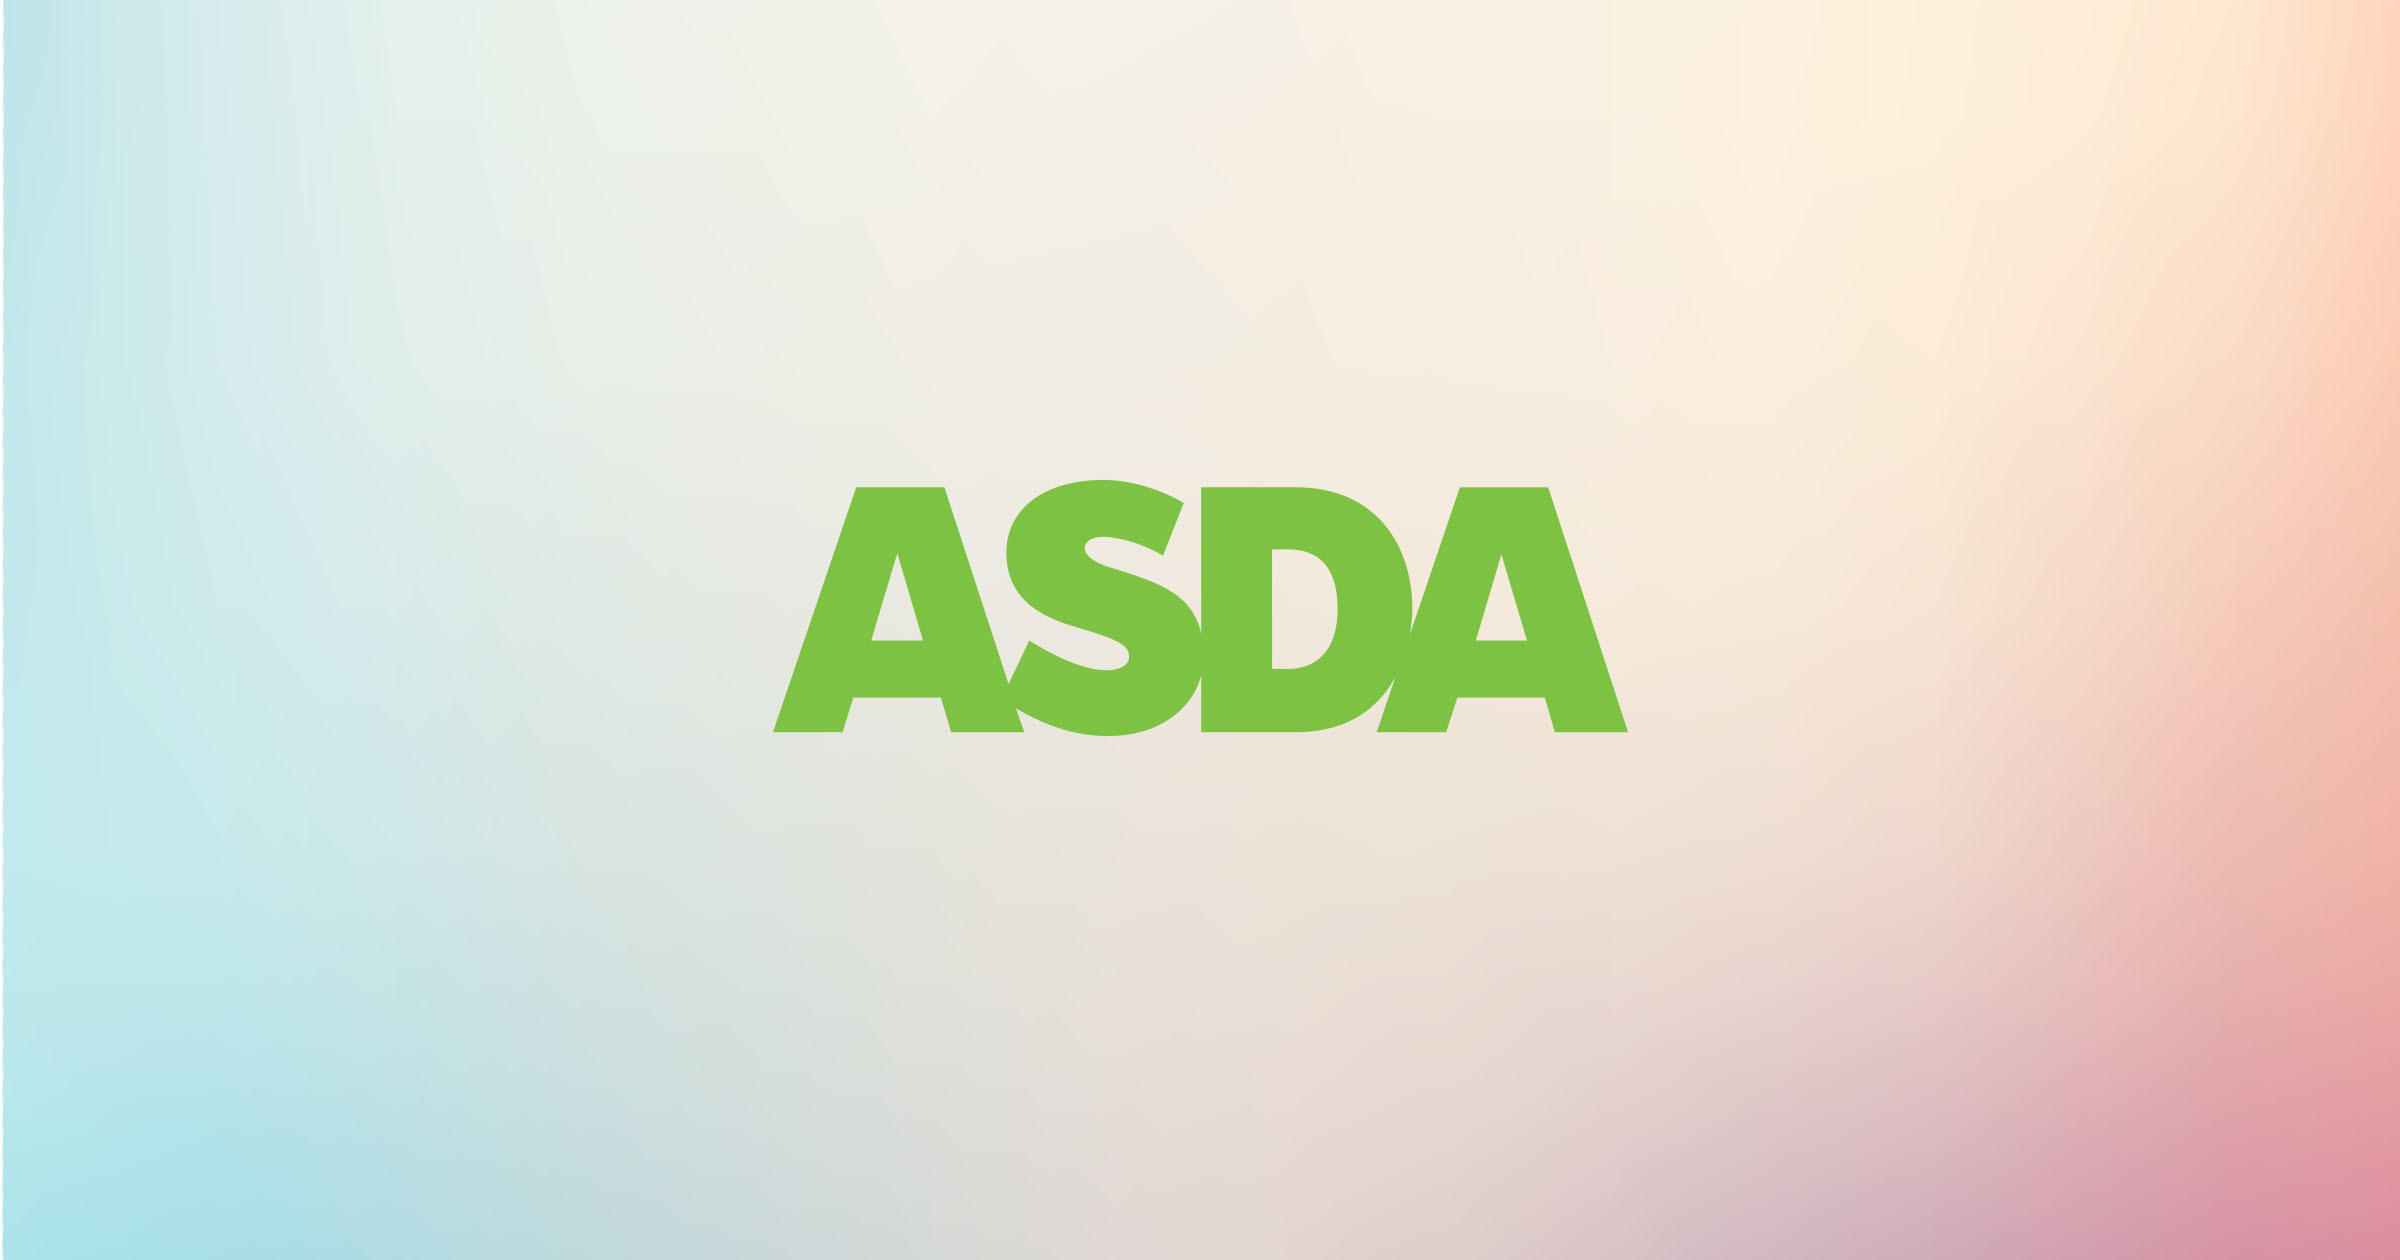 Asda expands rewards scheme to help customers save more money on